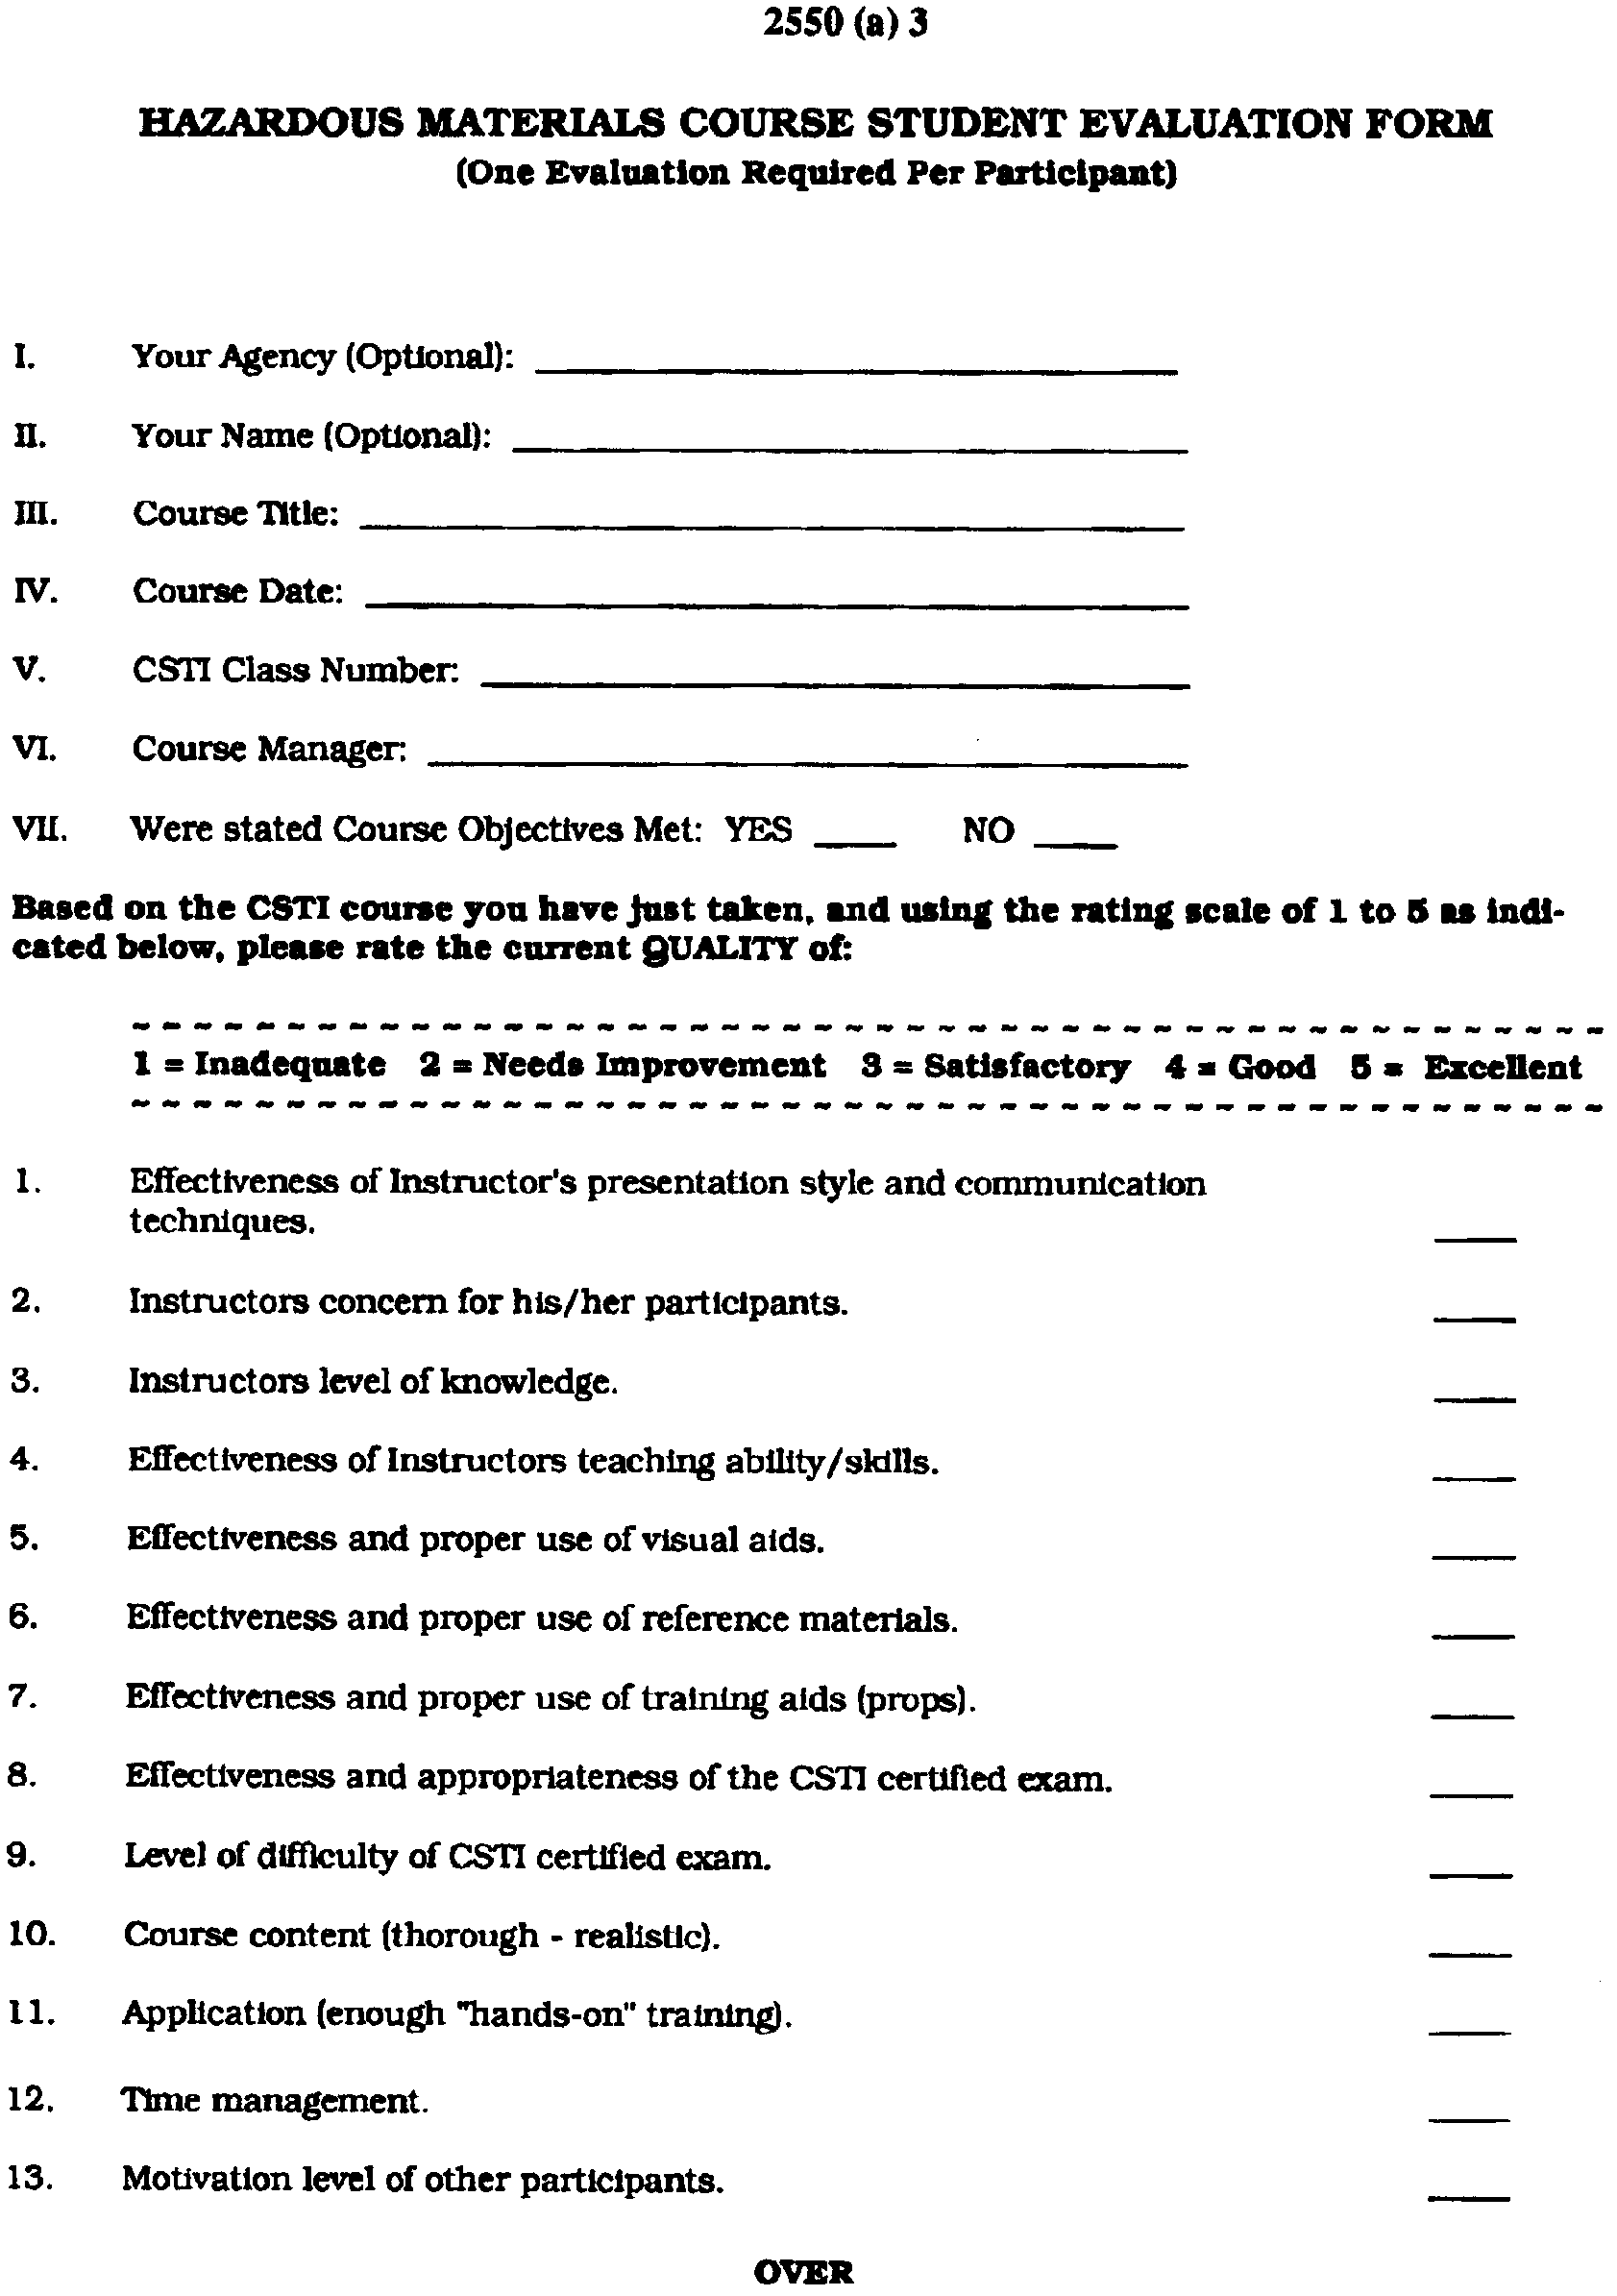 Image 3 within § 2550. Administrative Forms.